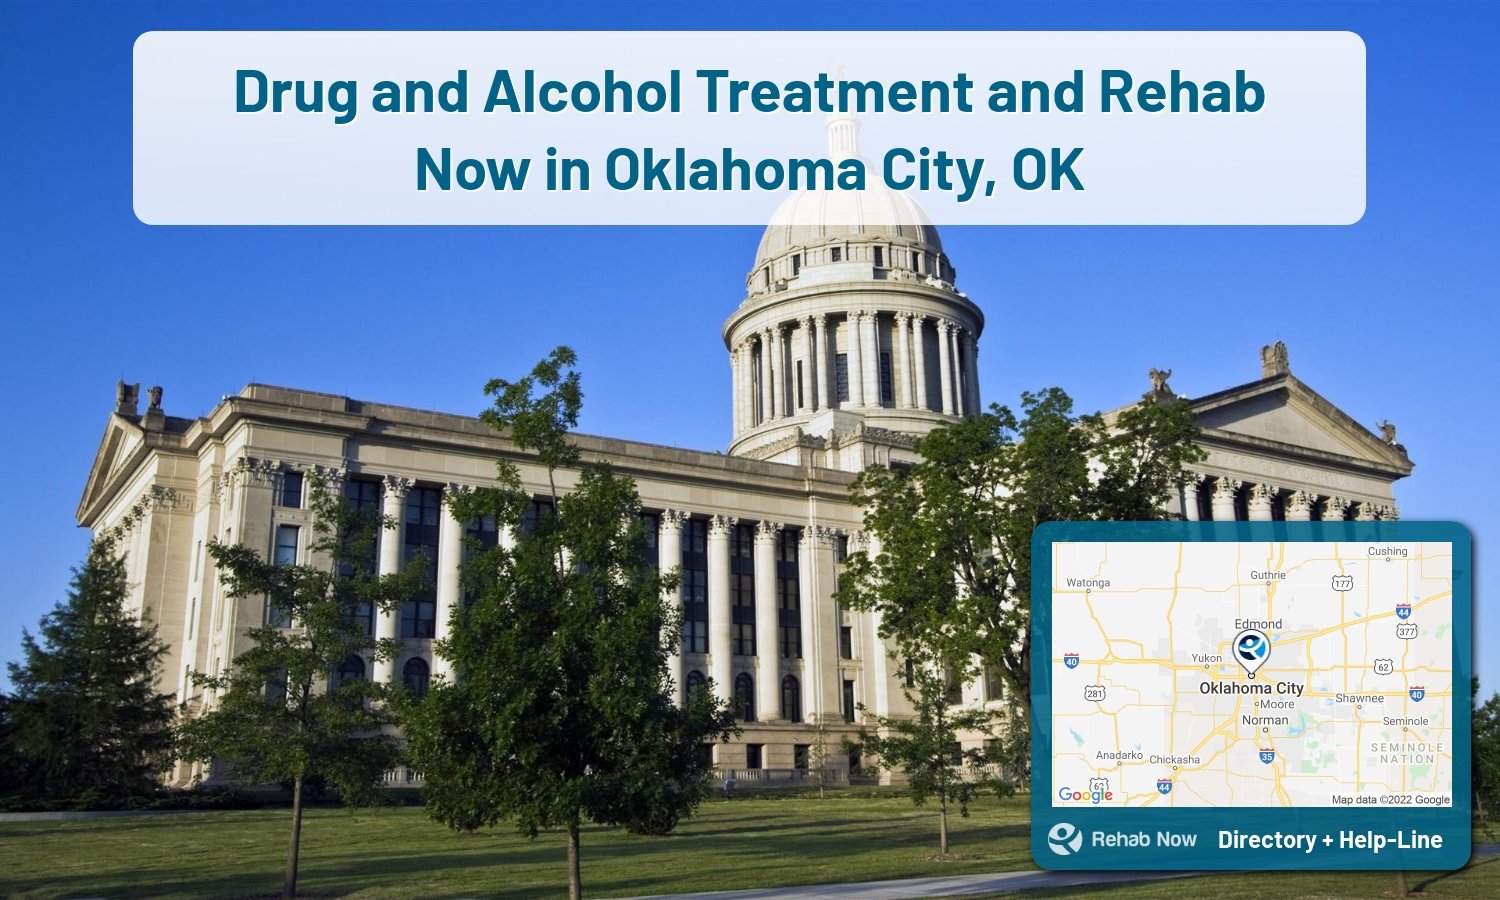 Ready to pick a rehab center in Oklahoma City? Get off alcohol, opiates, and other drugs, by selecting top drug rehab centers in Oklahoma